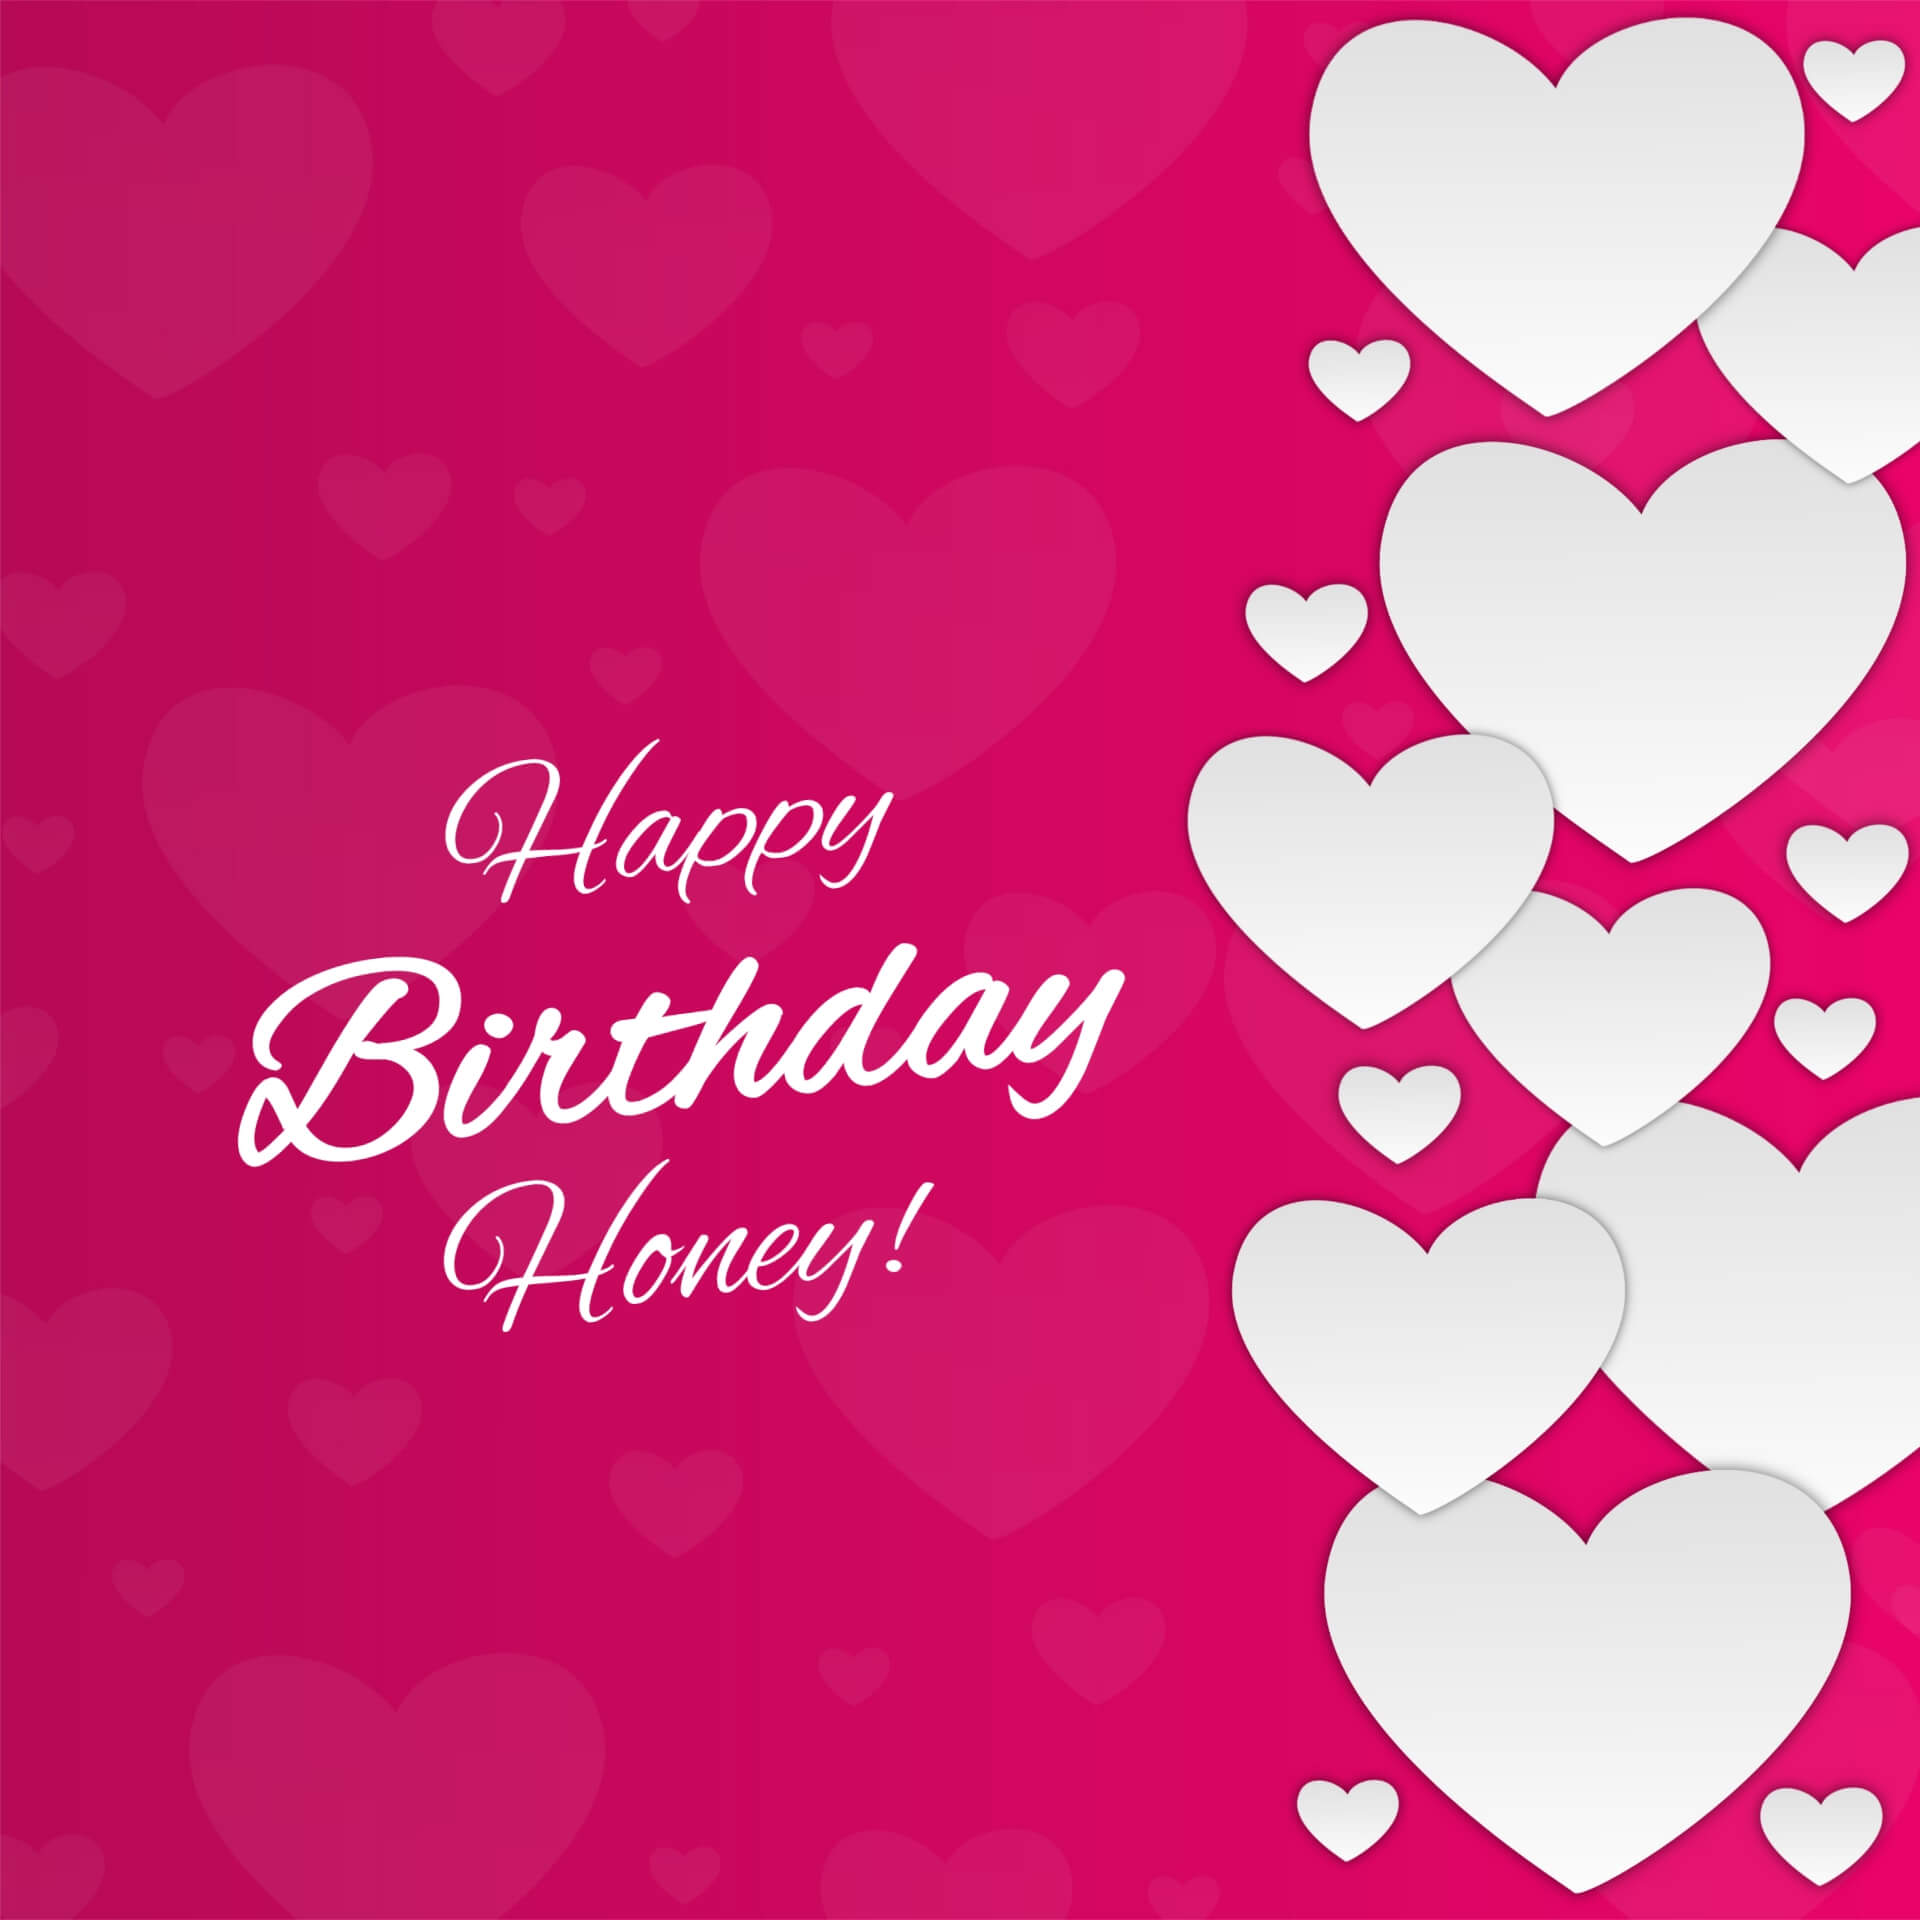 Happy Birthday Images for Love